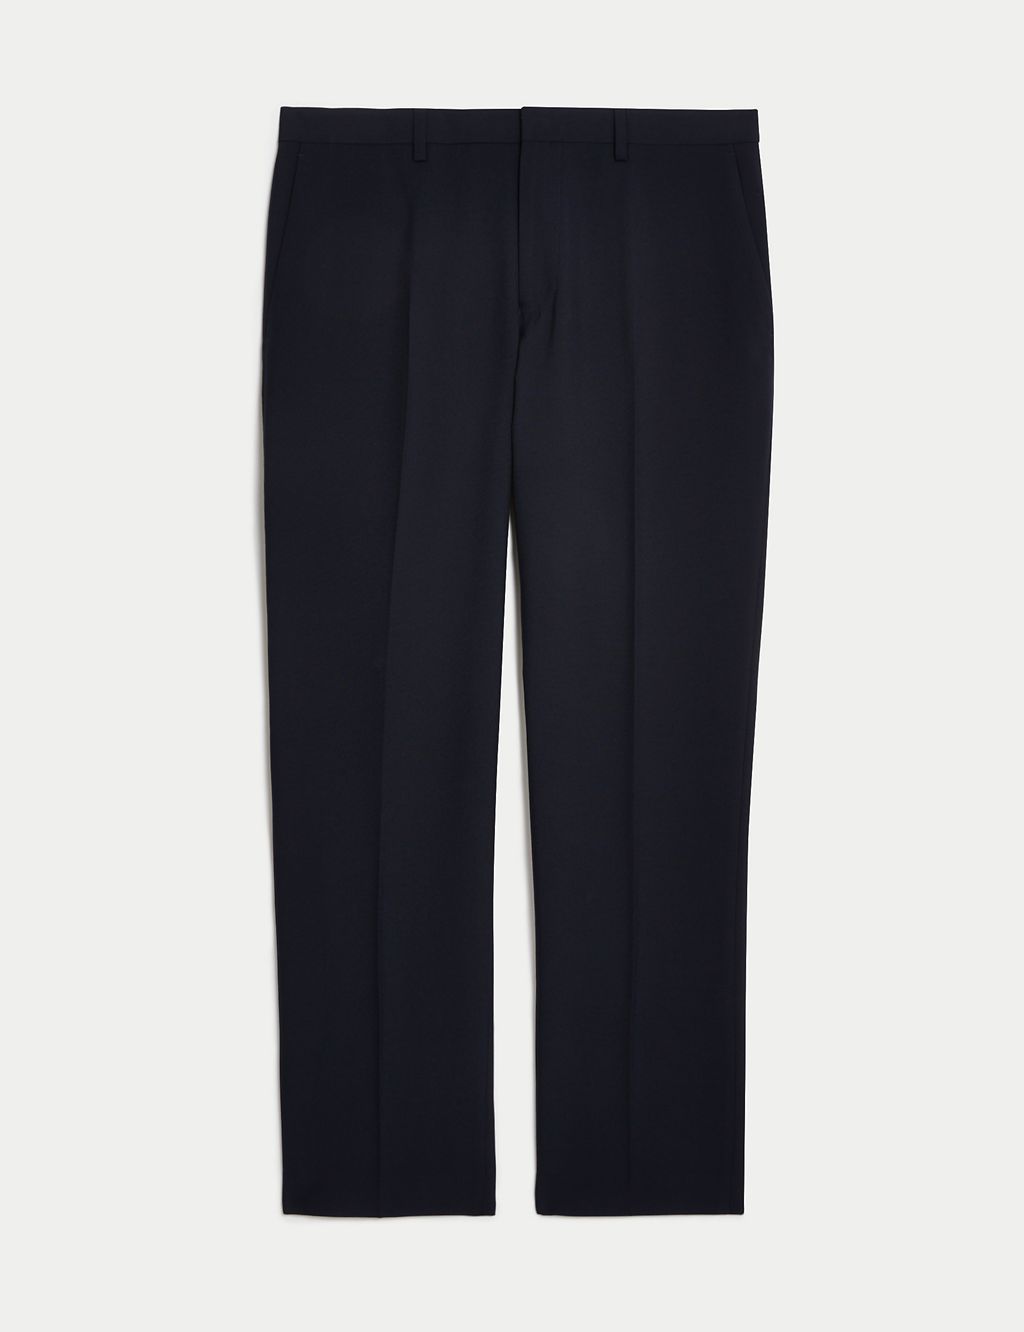 Slim Fit Suit Trousers 1 of 8